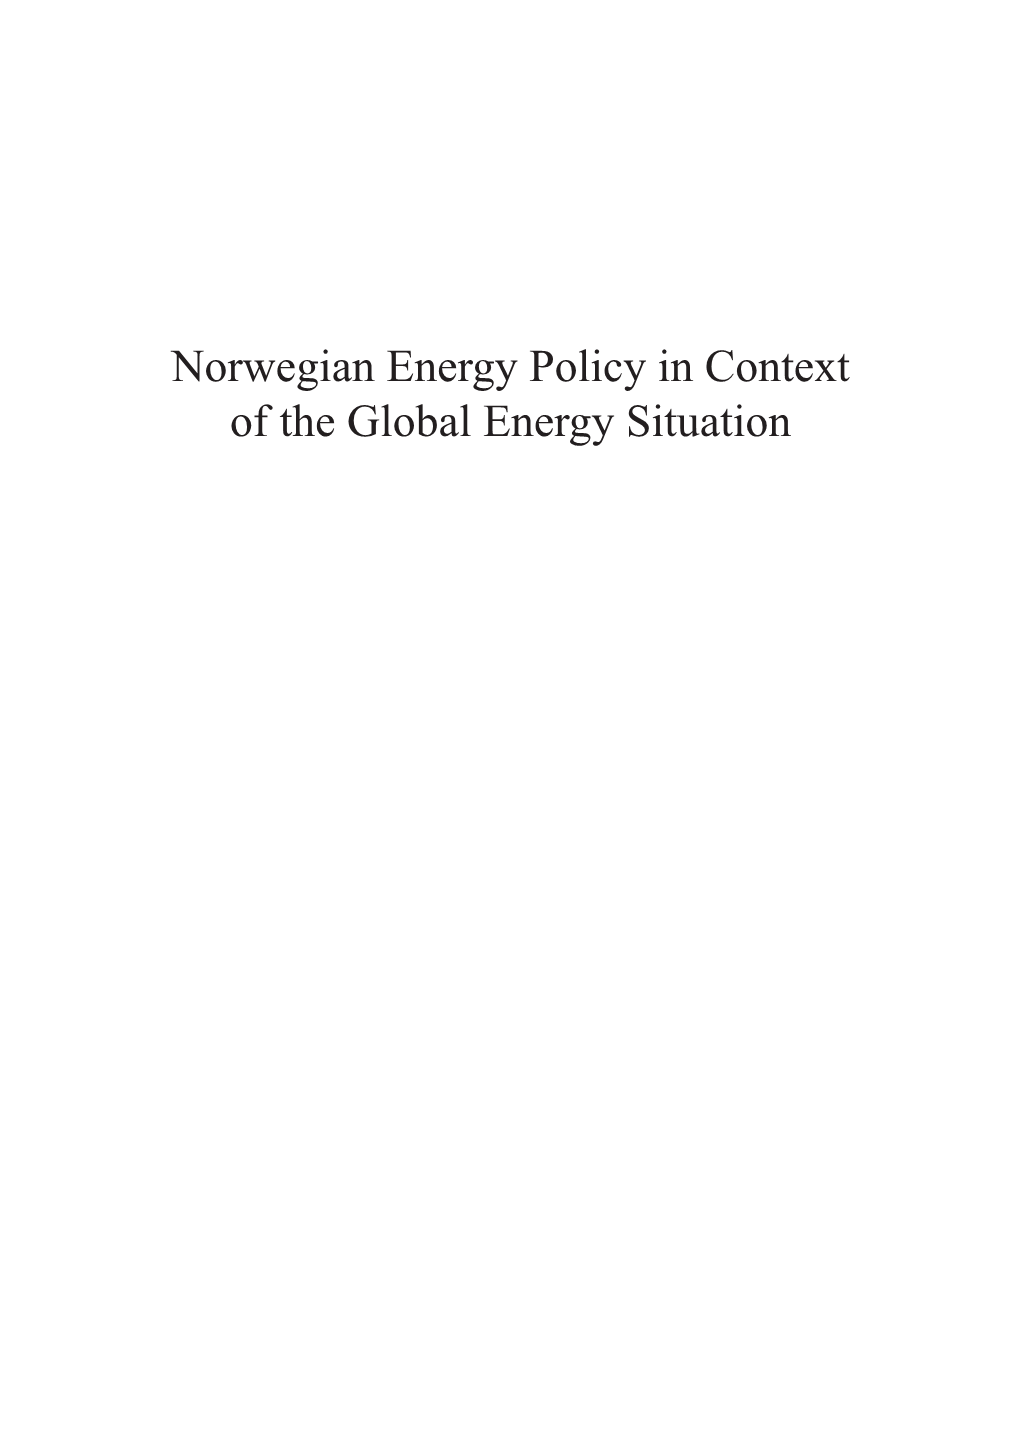 Norwegian Energy Policy in Context of the Global Energy Situation